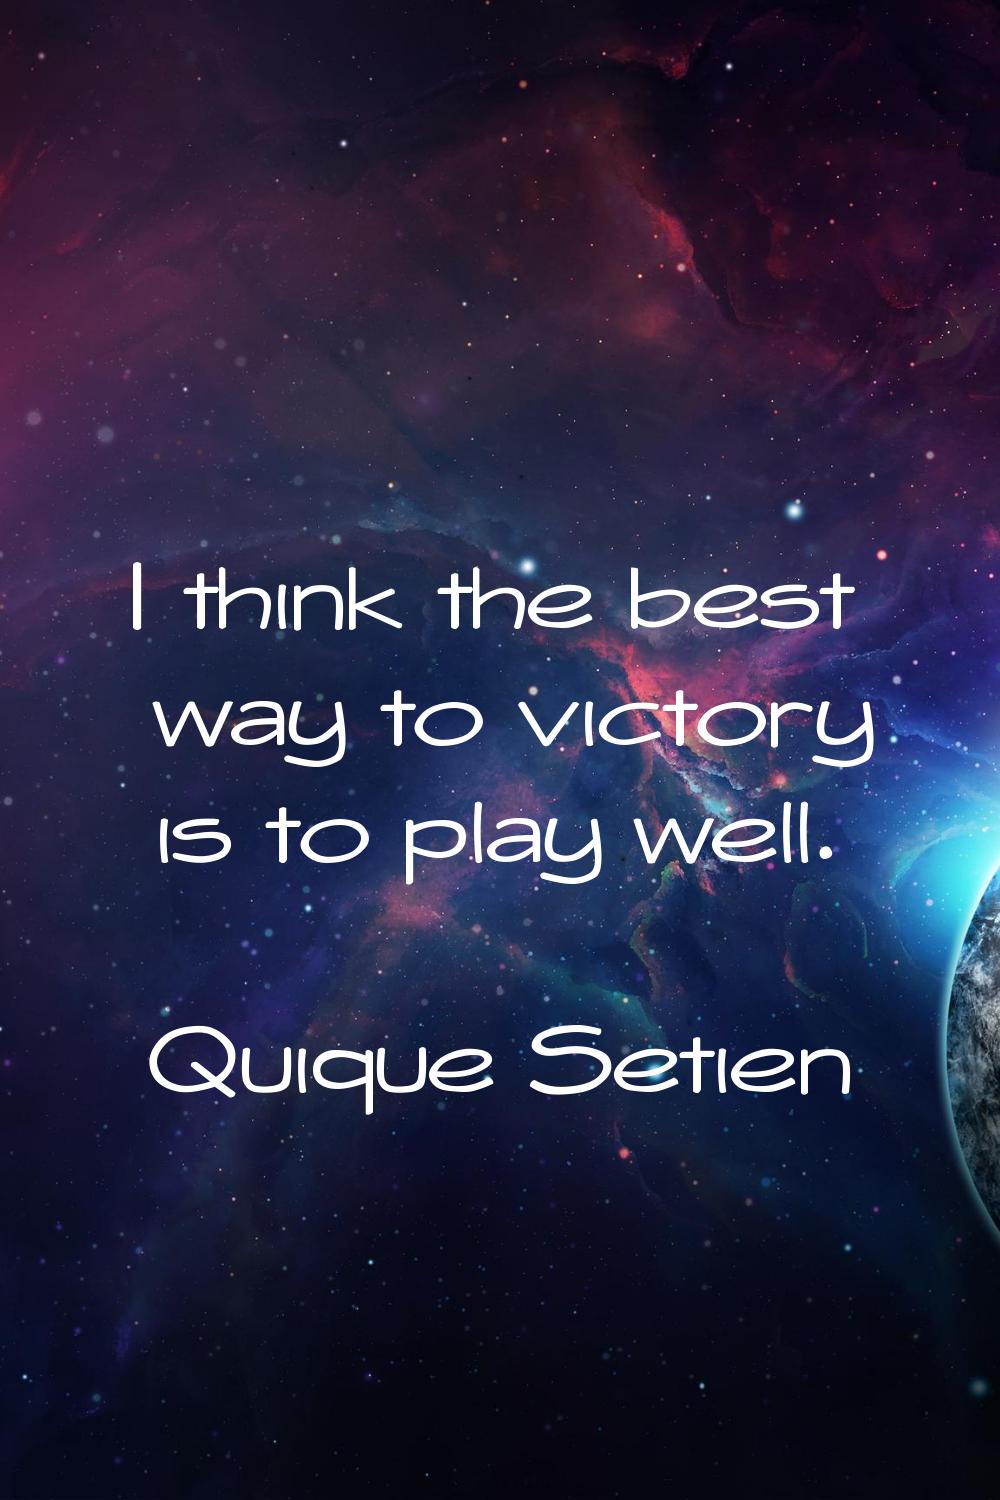 I think the best way to victory is to play well.